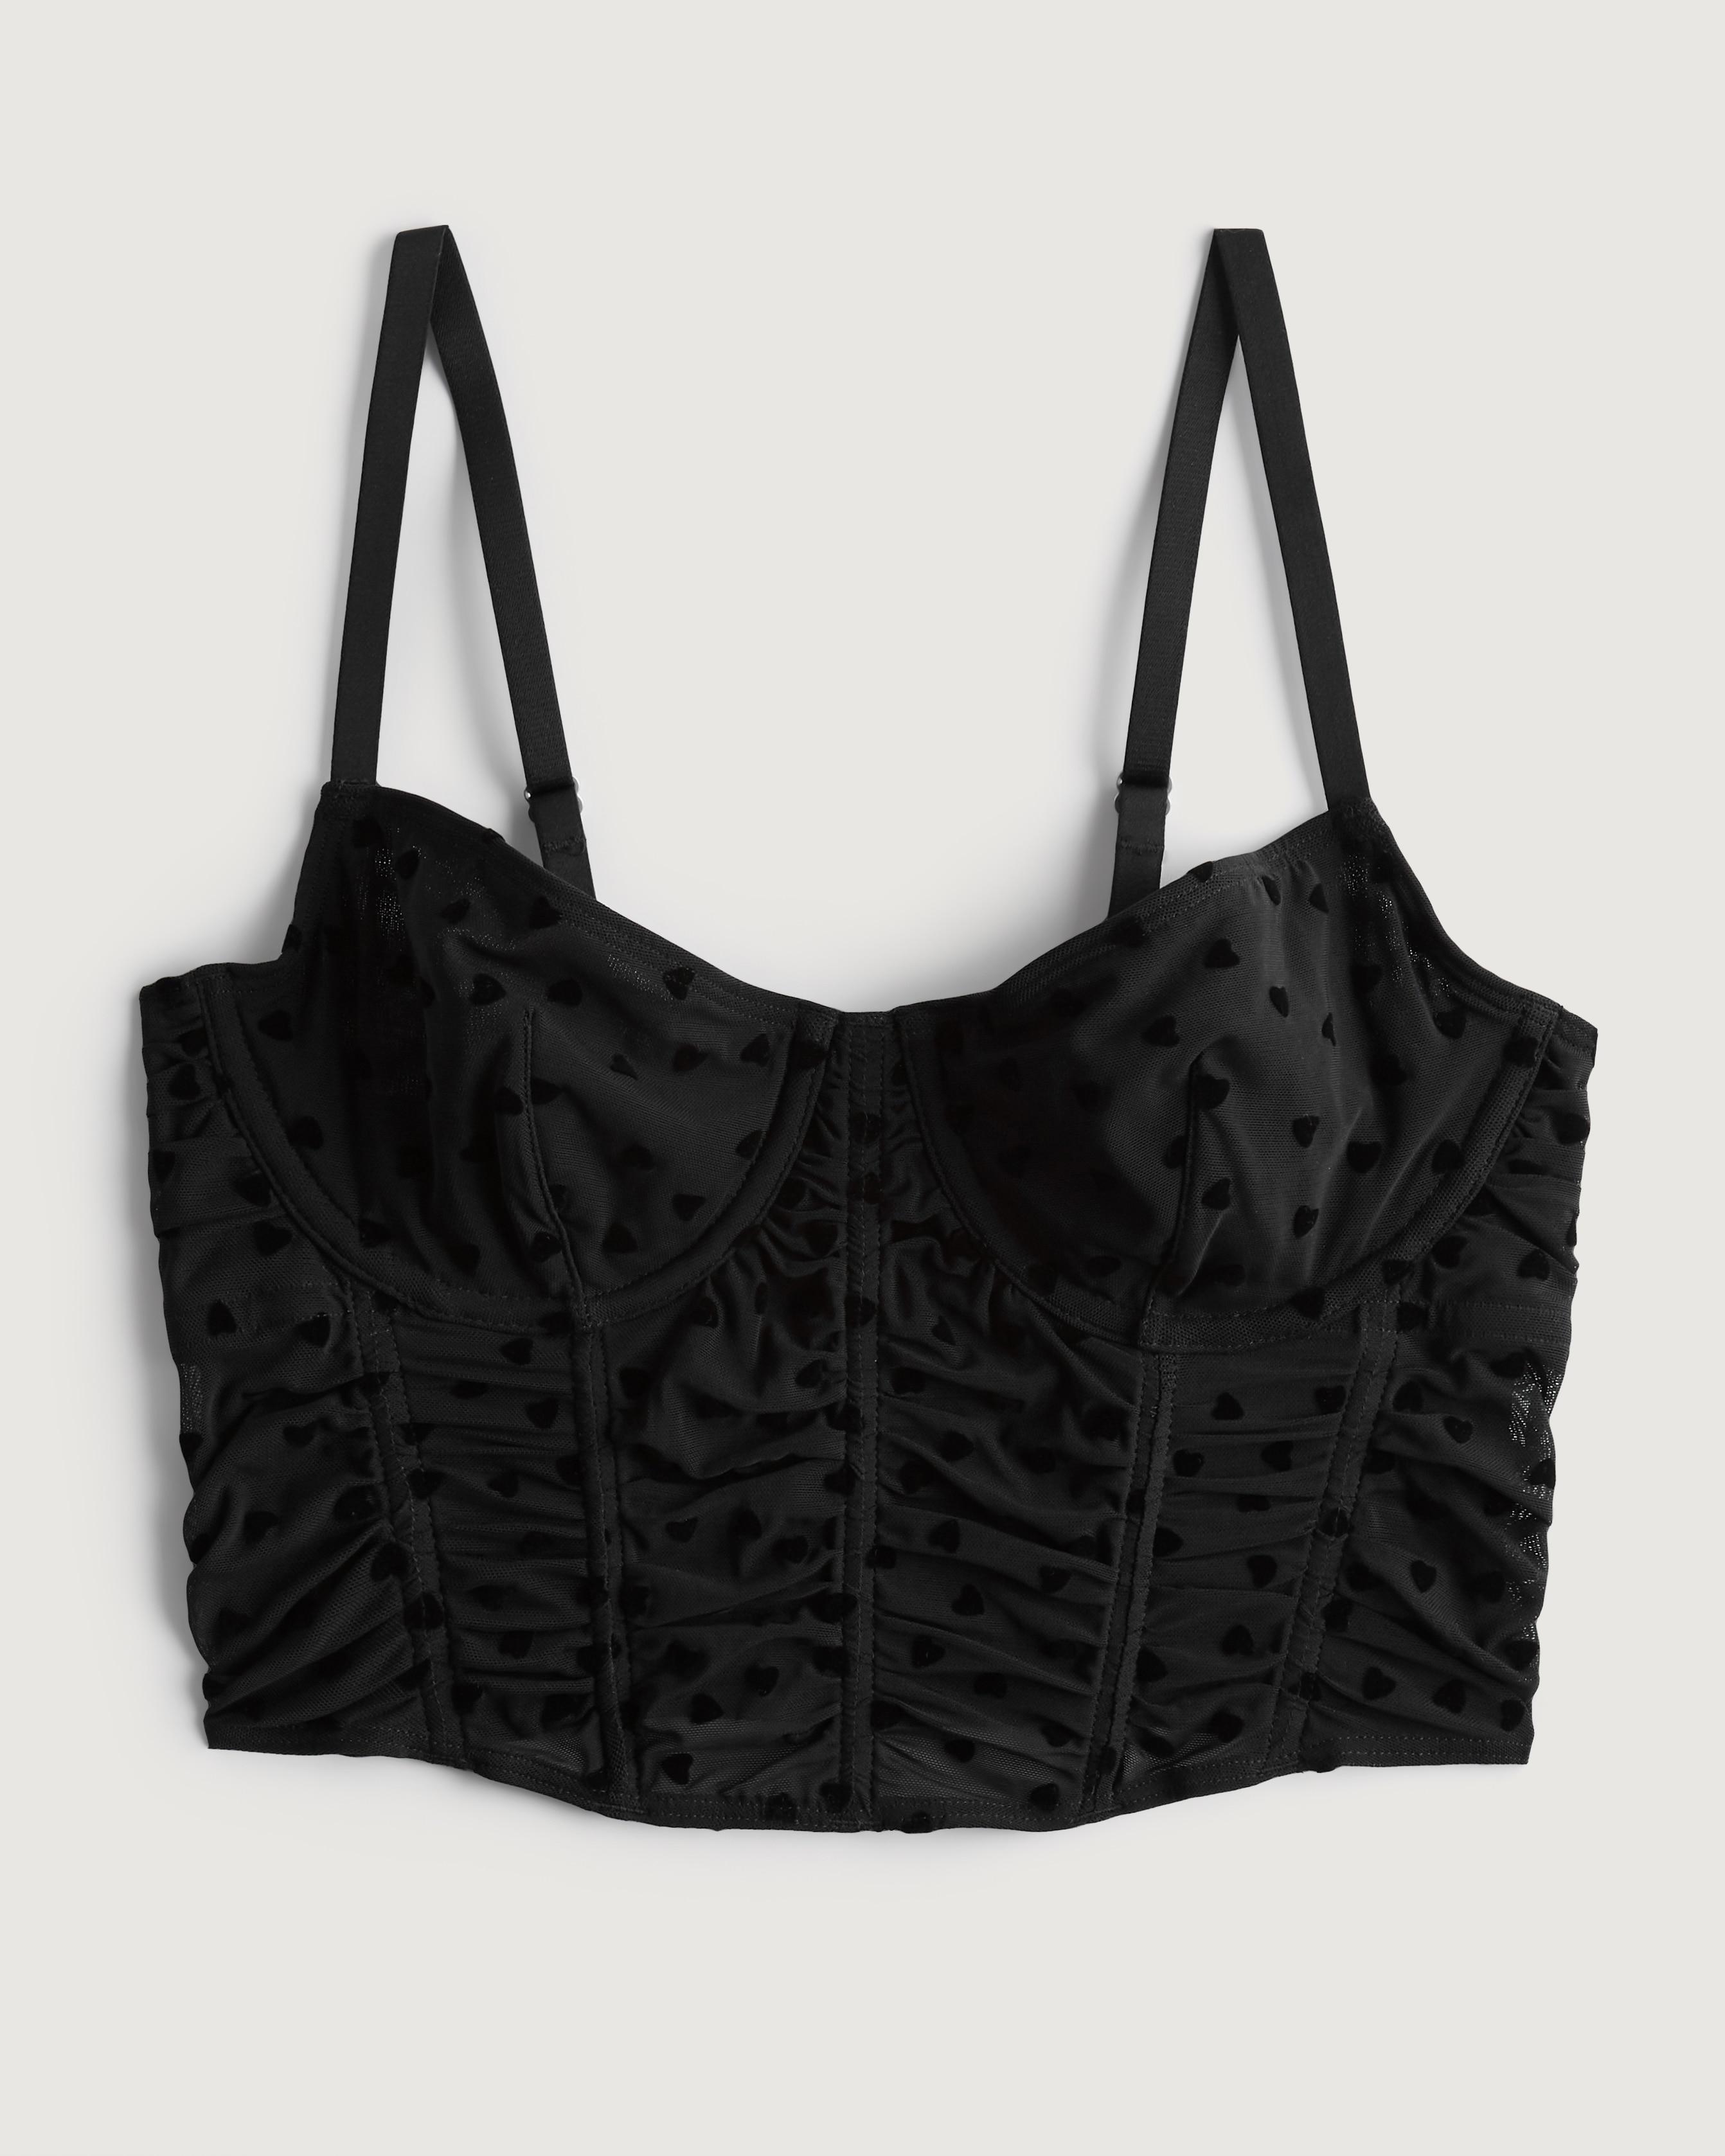 Hollister Gilly Hicks Lace Bustier